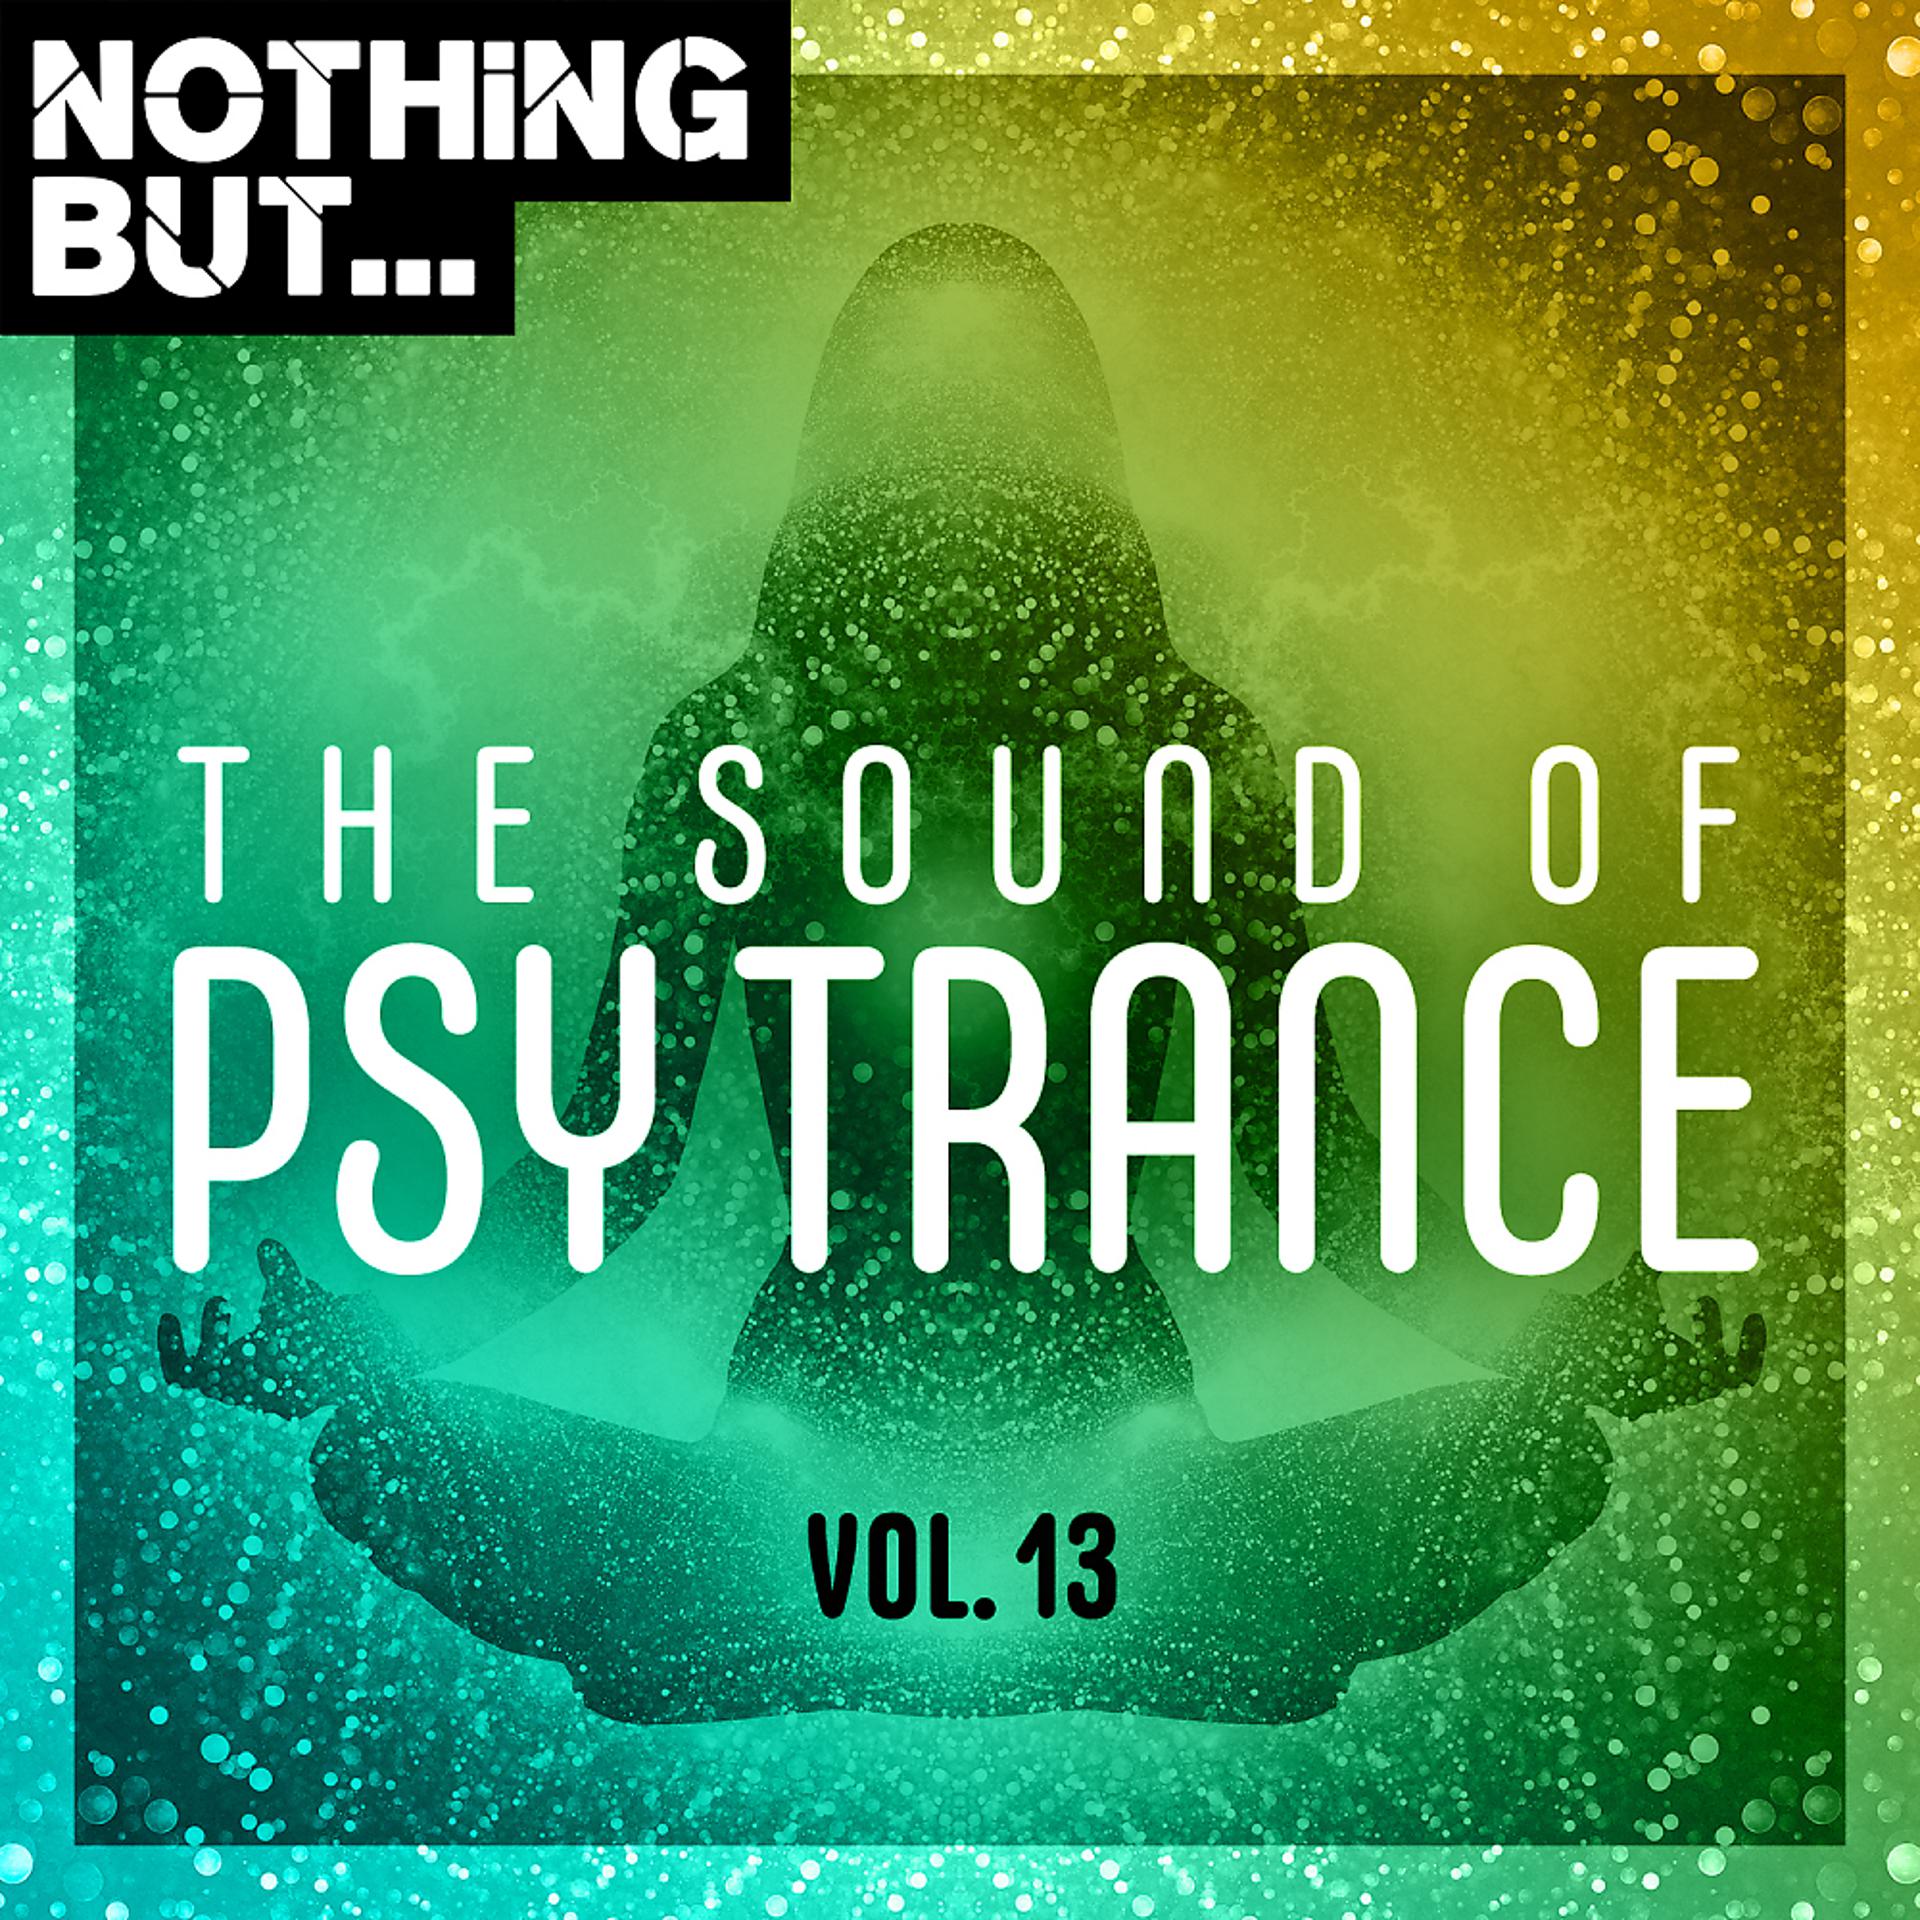 Постер альбома Nothing But... The Sound of Psy Trance, Vol. 13